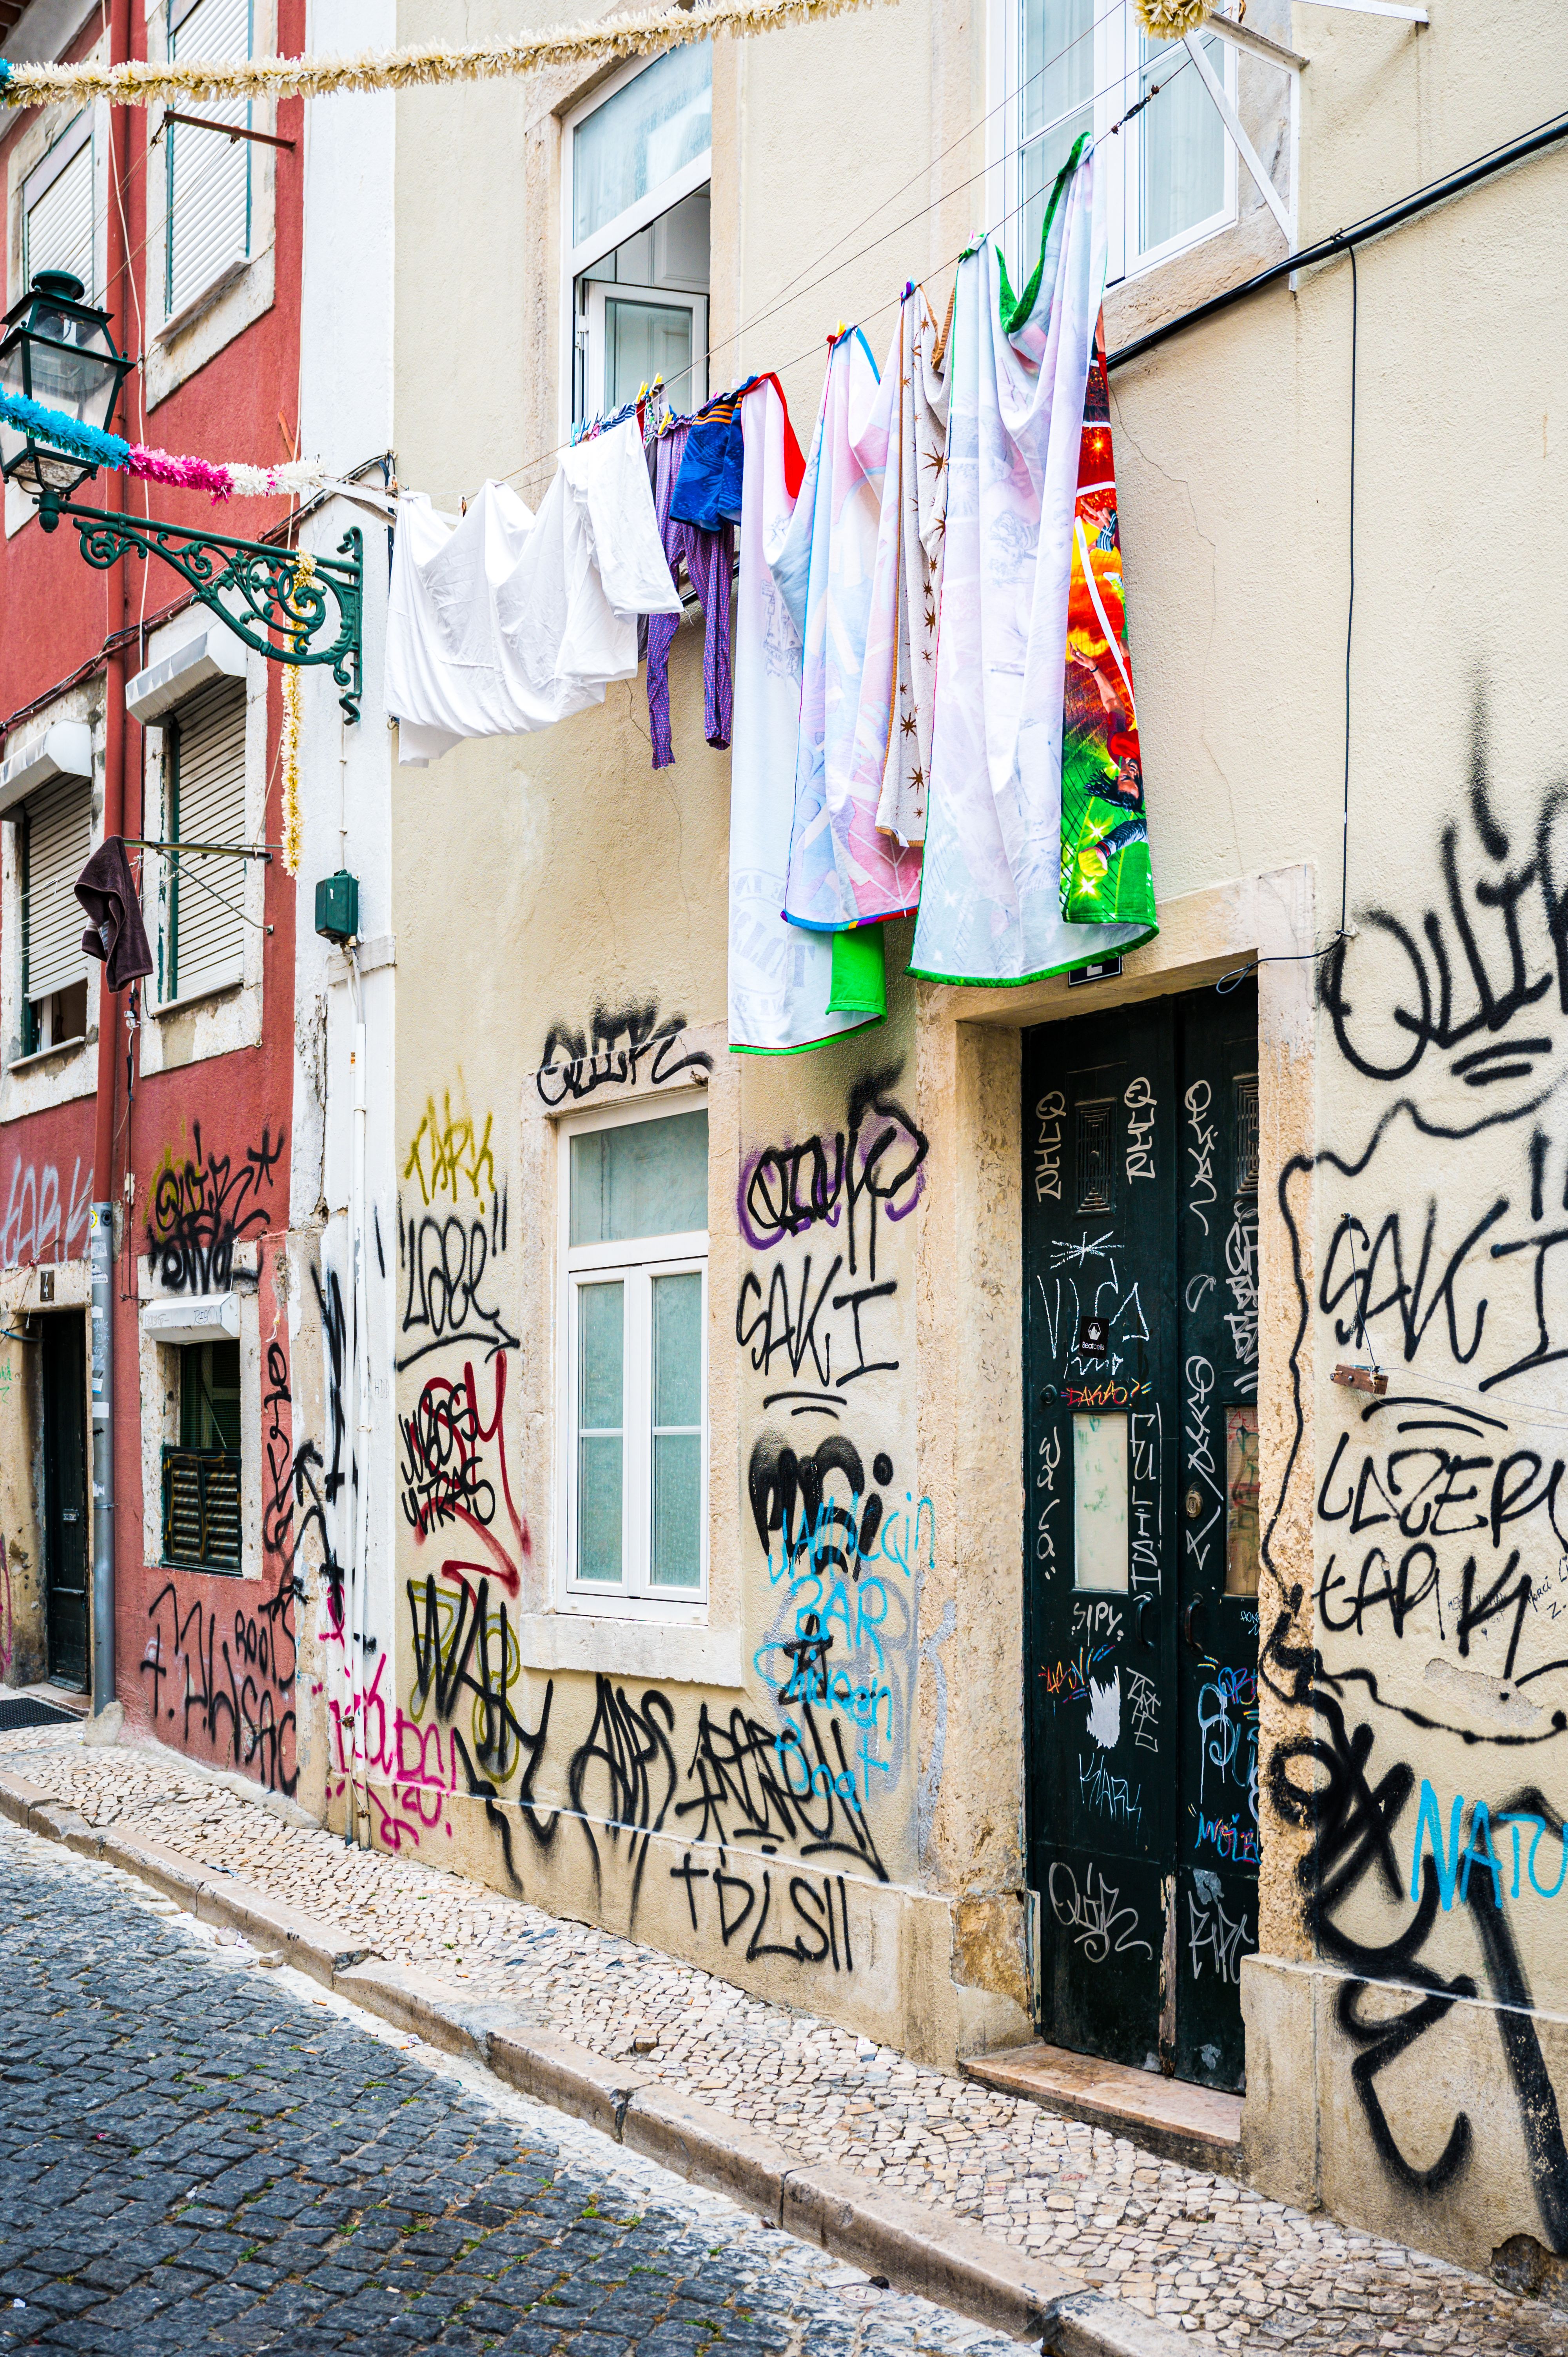 Graffiti covered home with hanging laundry in Lisbon, Portugal